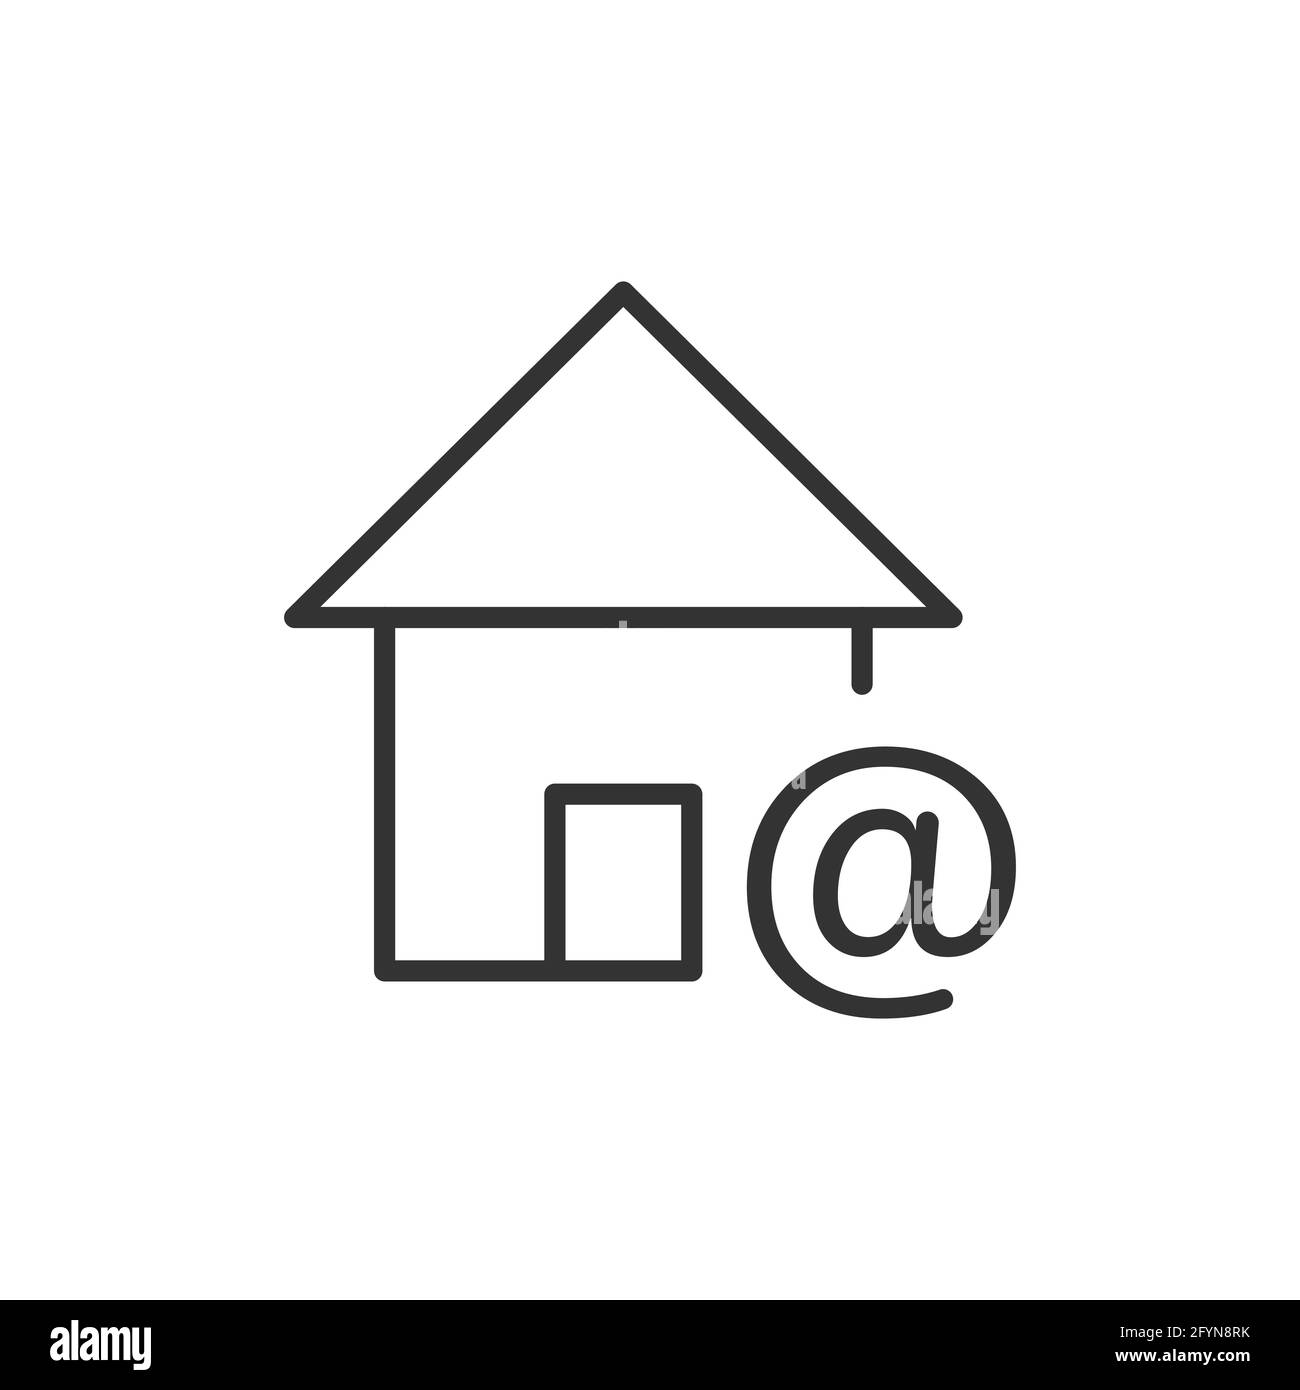 Home icon. House black pictogram with email sign. Home address concept. Building silhouette symbol. Stock Vector